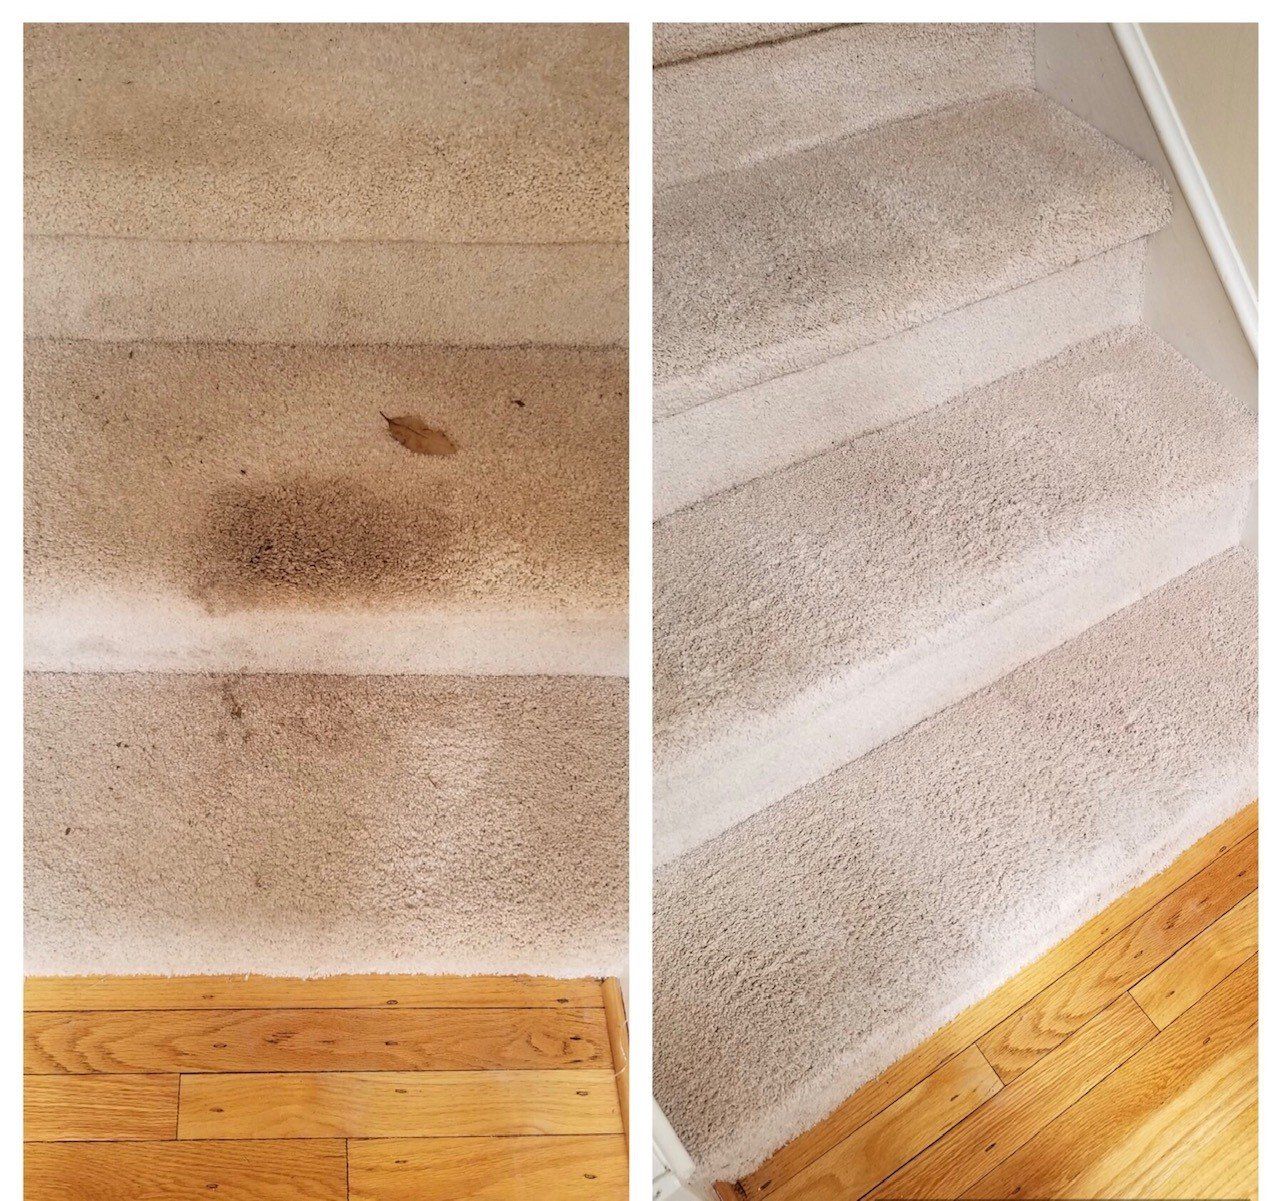 Professional Stairs Carpet Cleaning, Durham NC